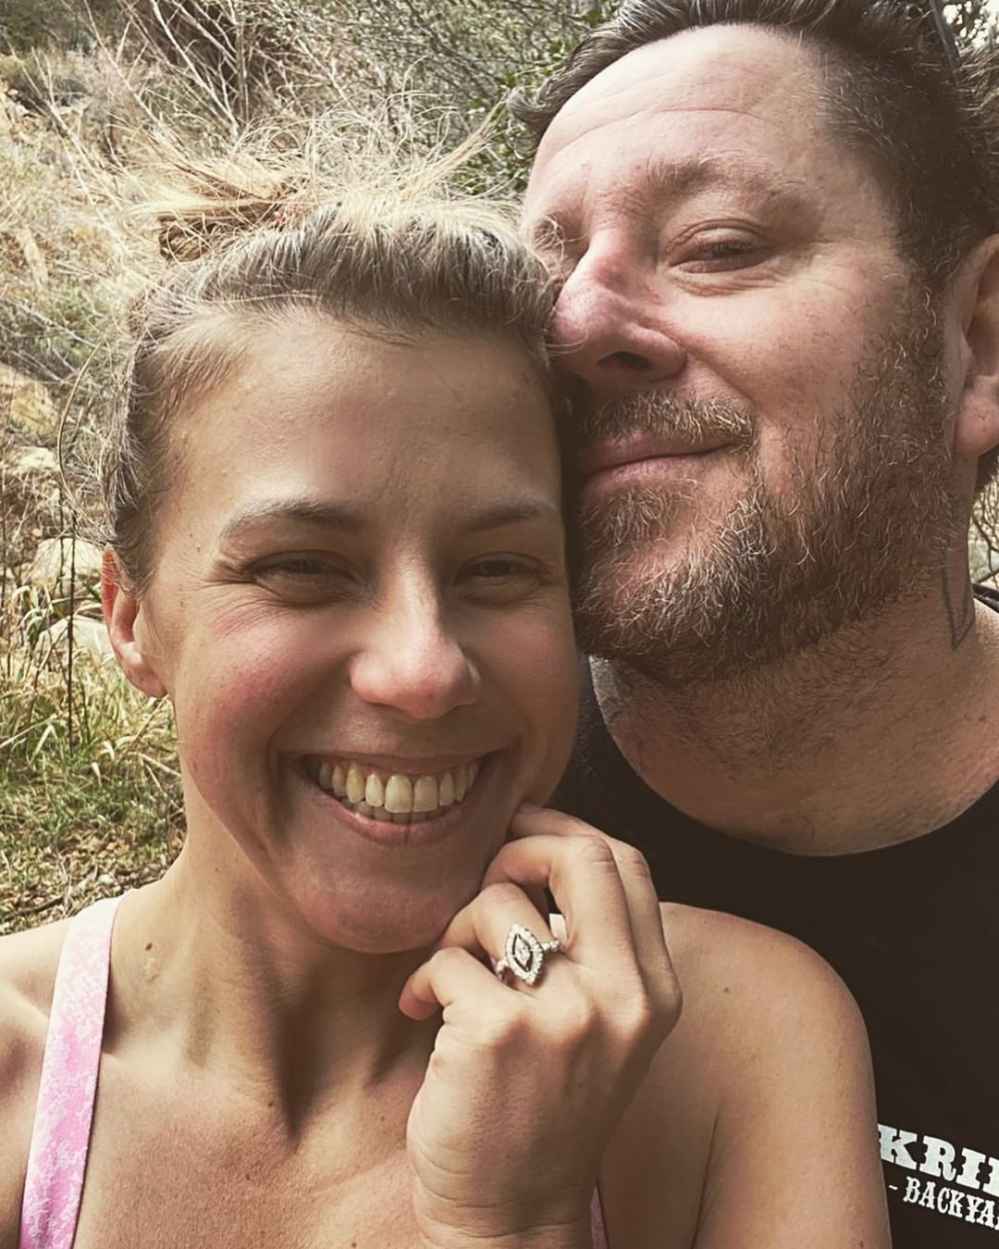 'Full House' Alum Jodie Sweetin and Mescal Wasilewski Are Married After Nearly 5 Years Together